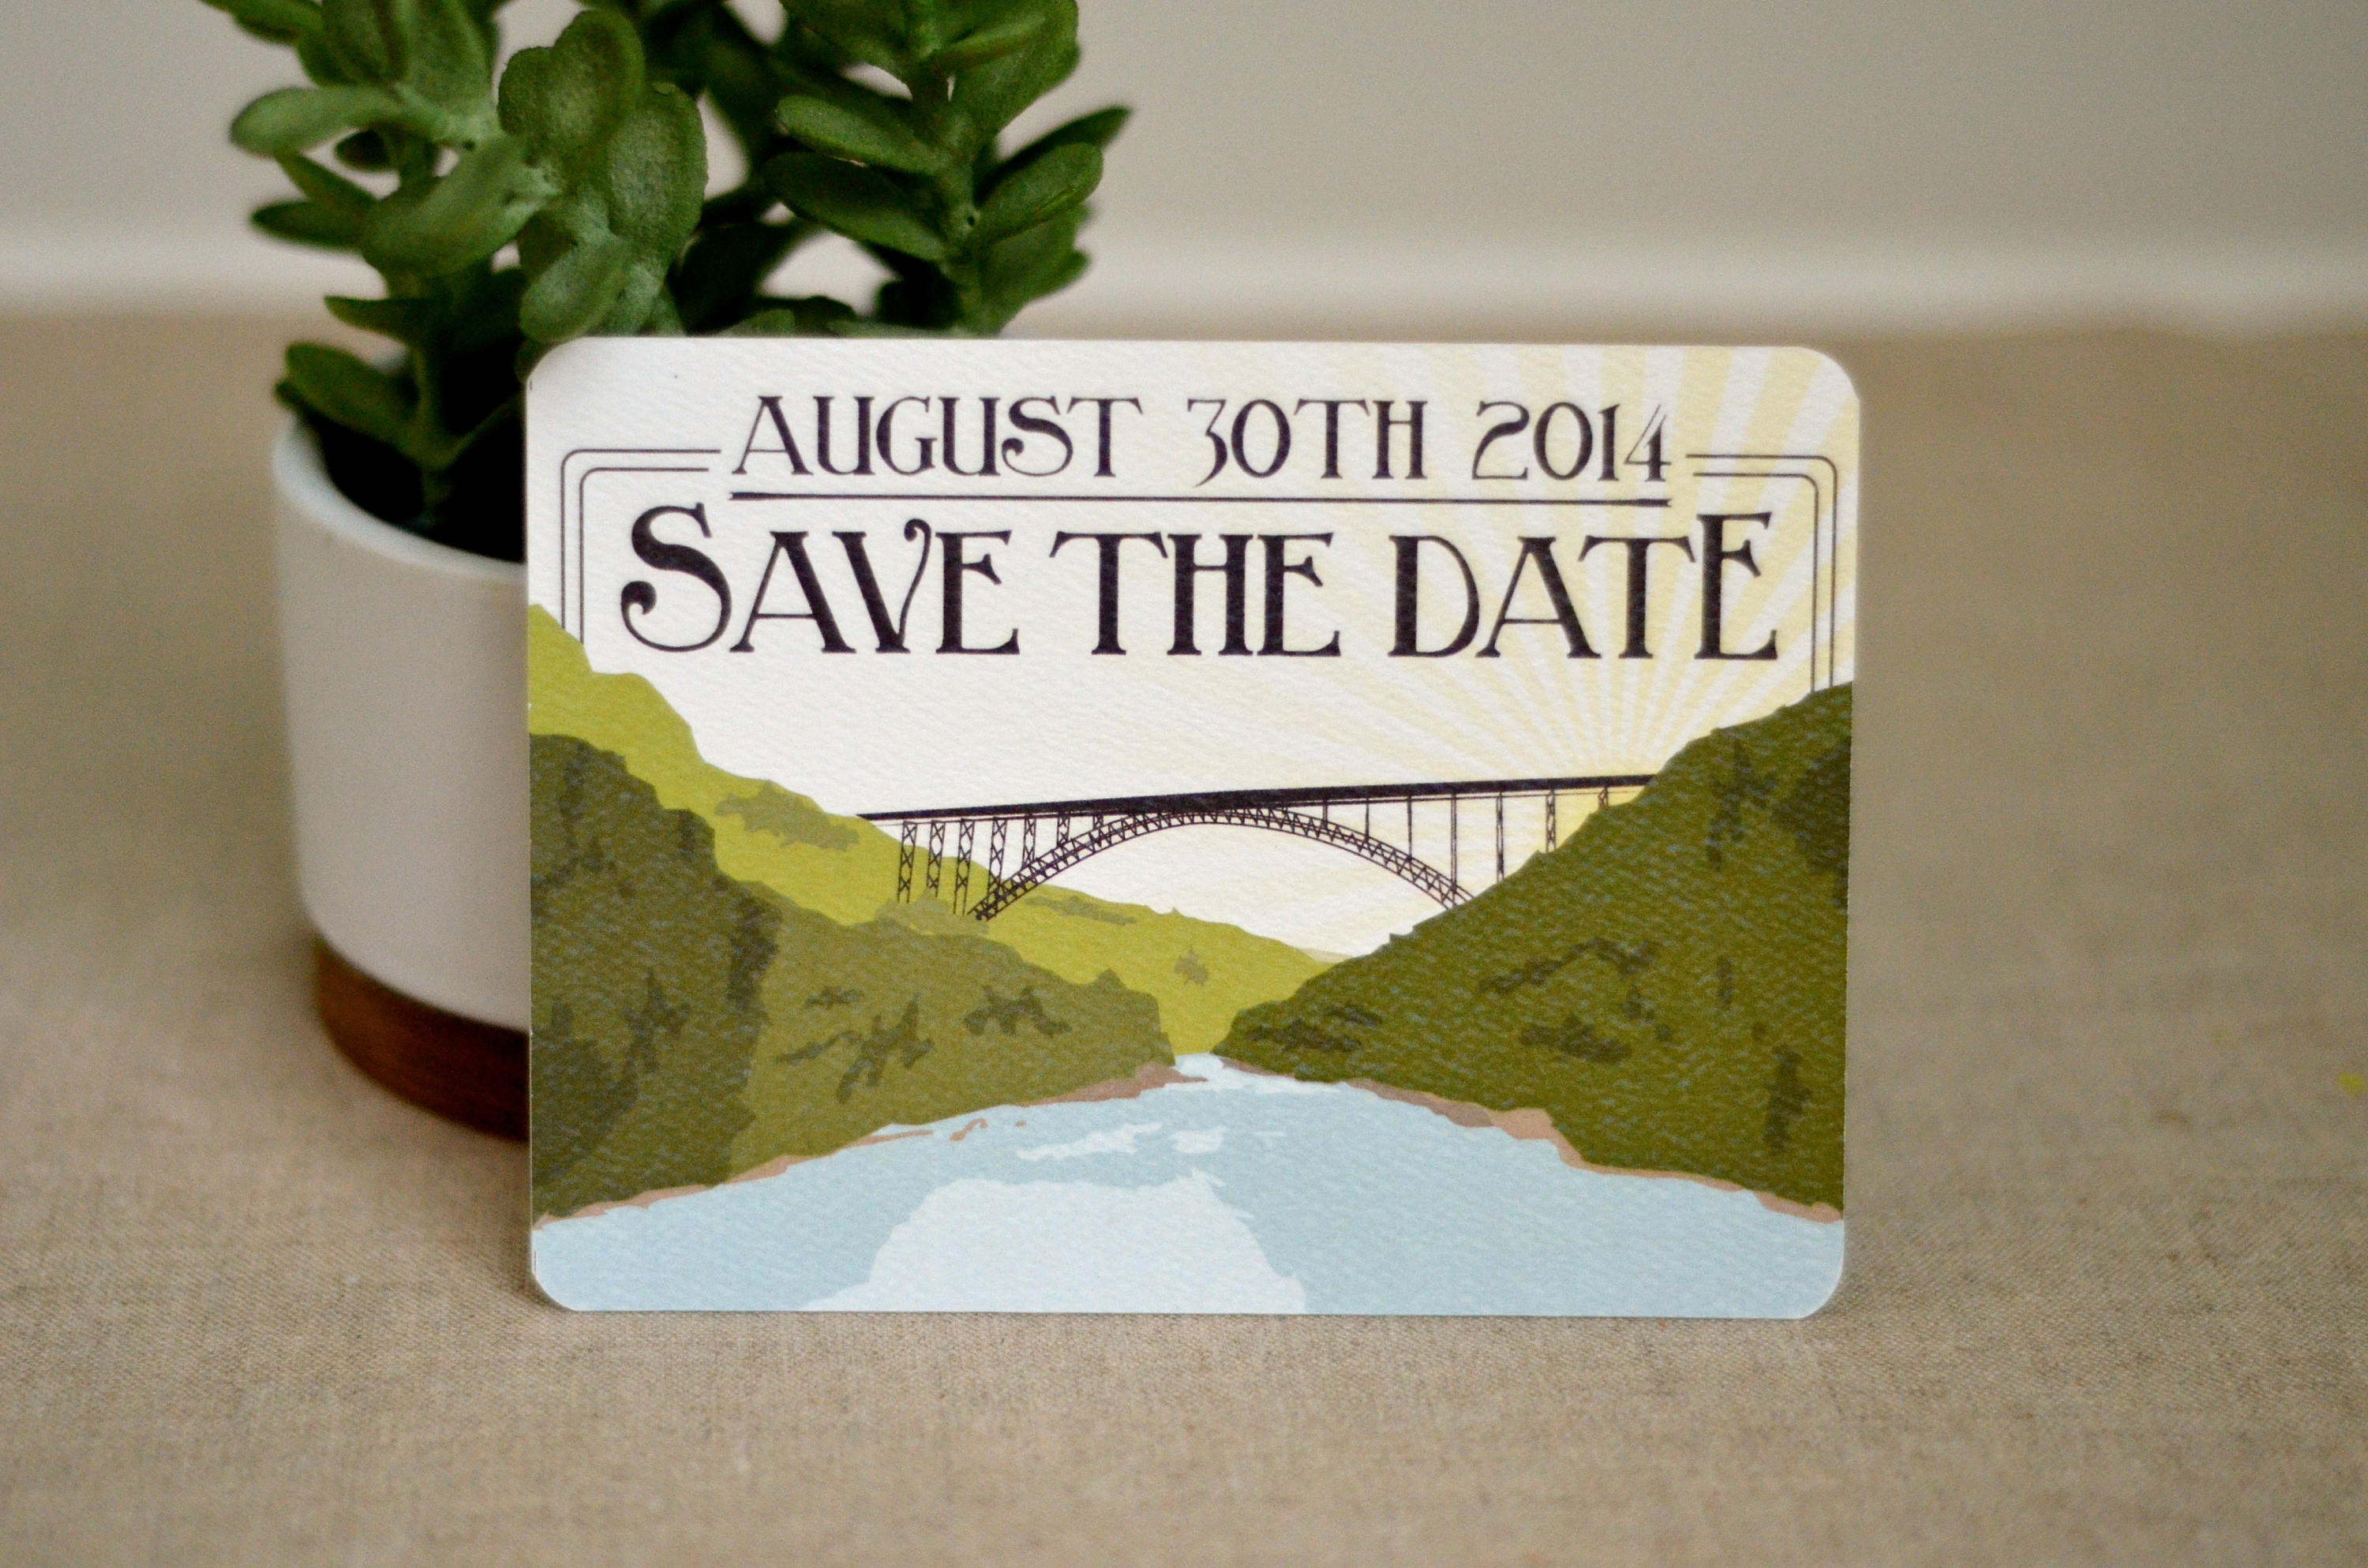 New River Gorge with Bridge West Virginia Save the Date Postcards